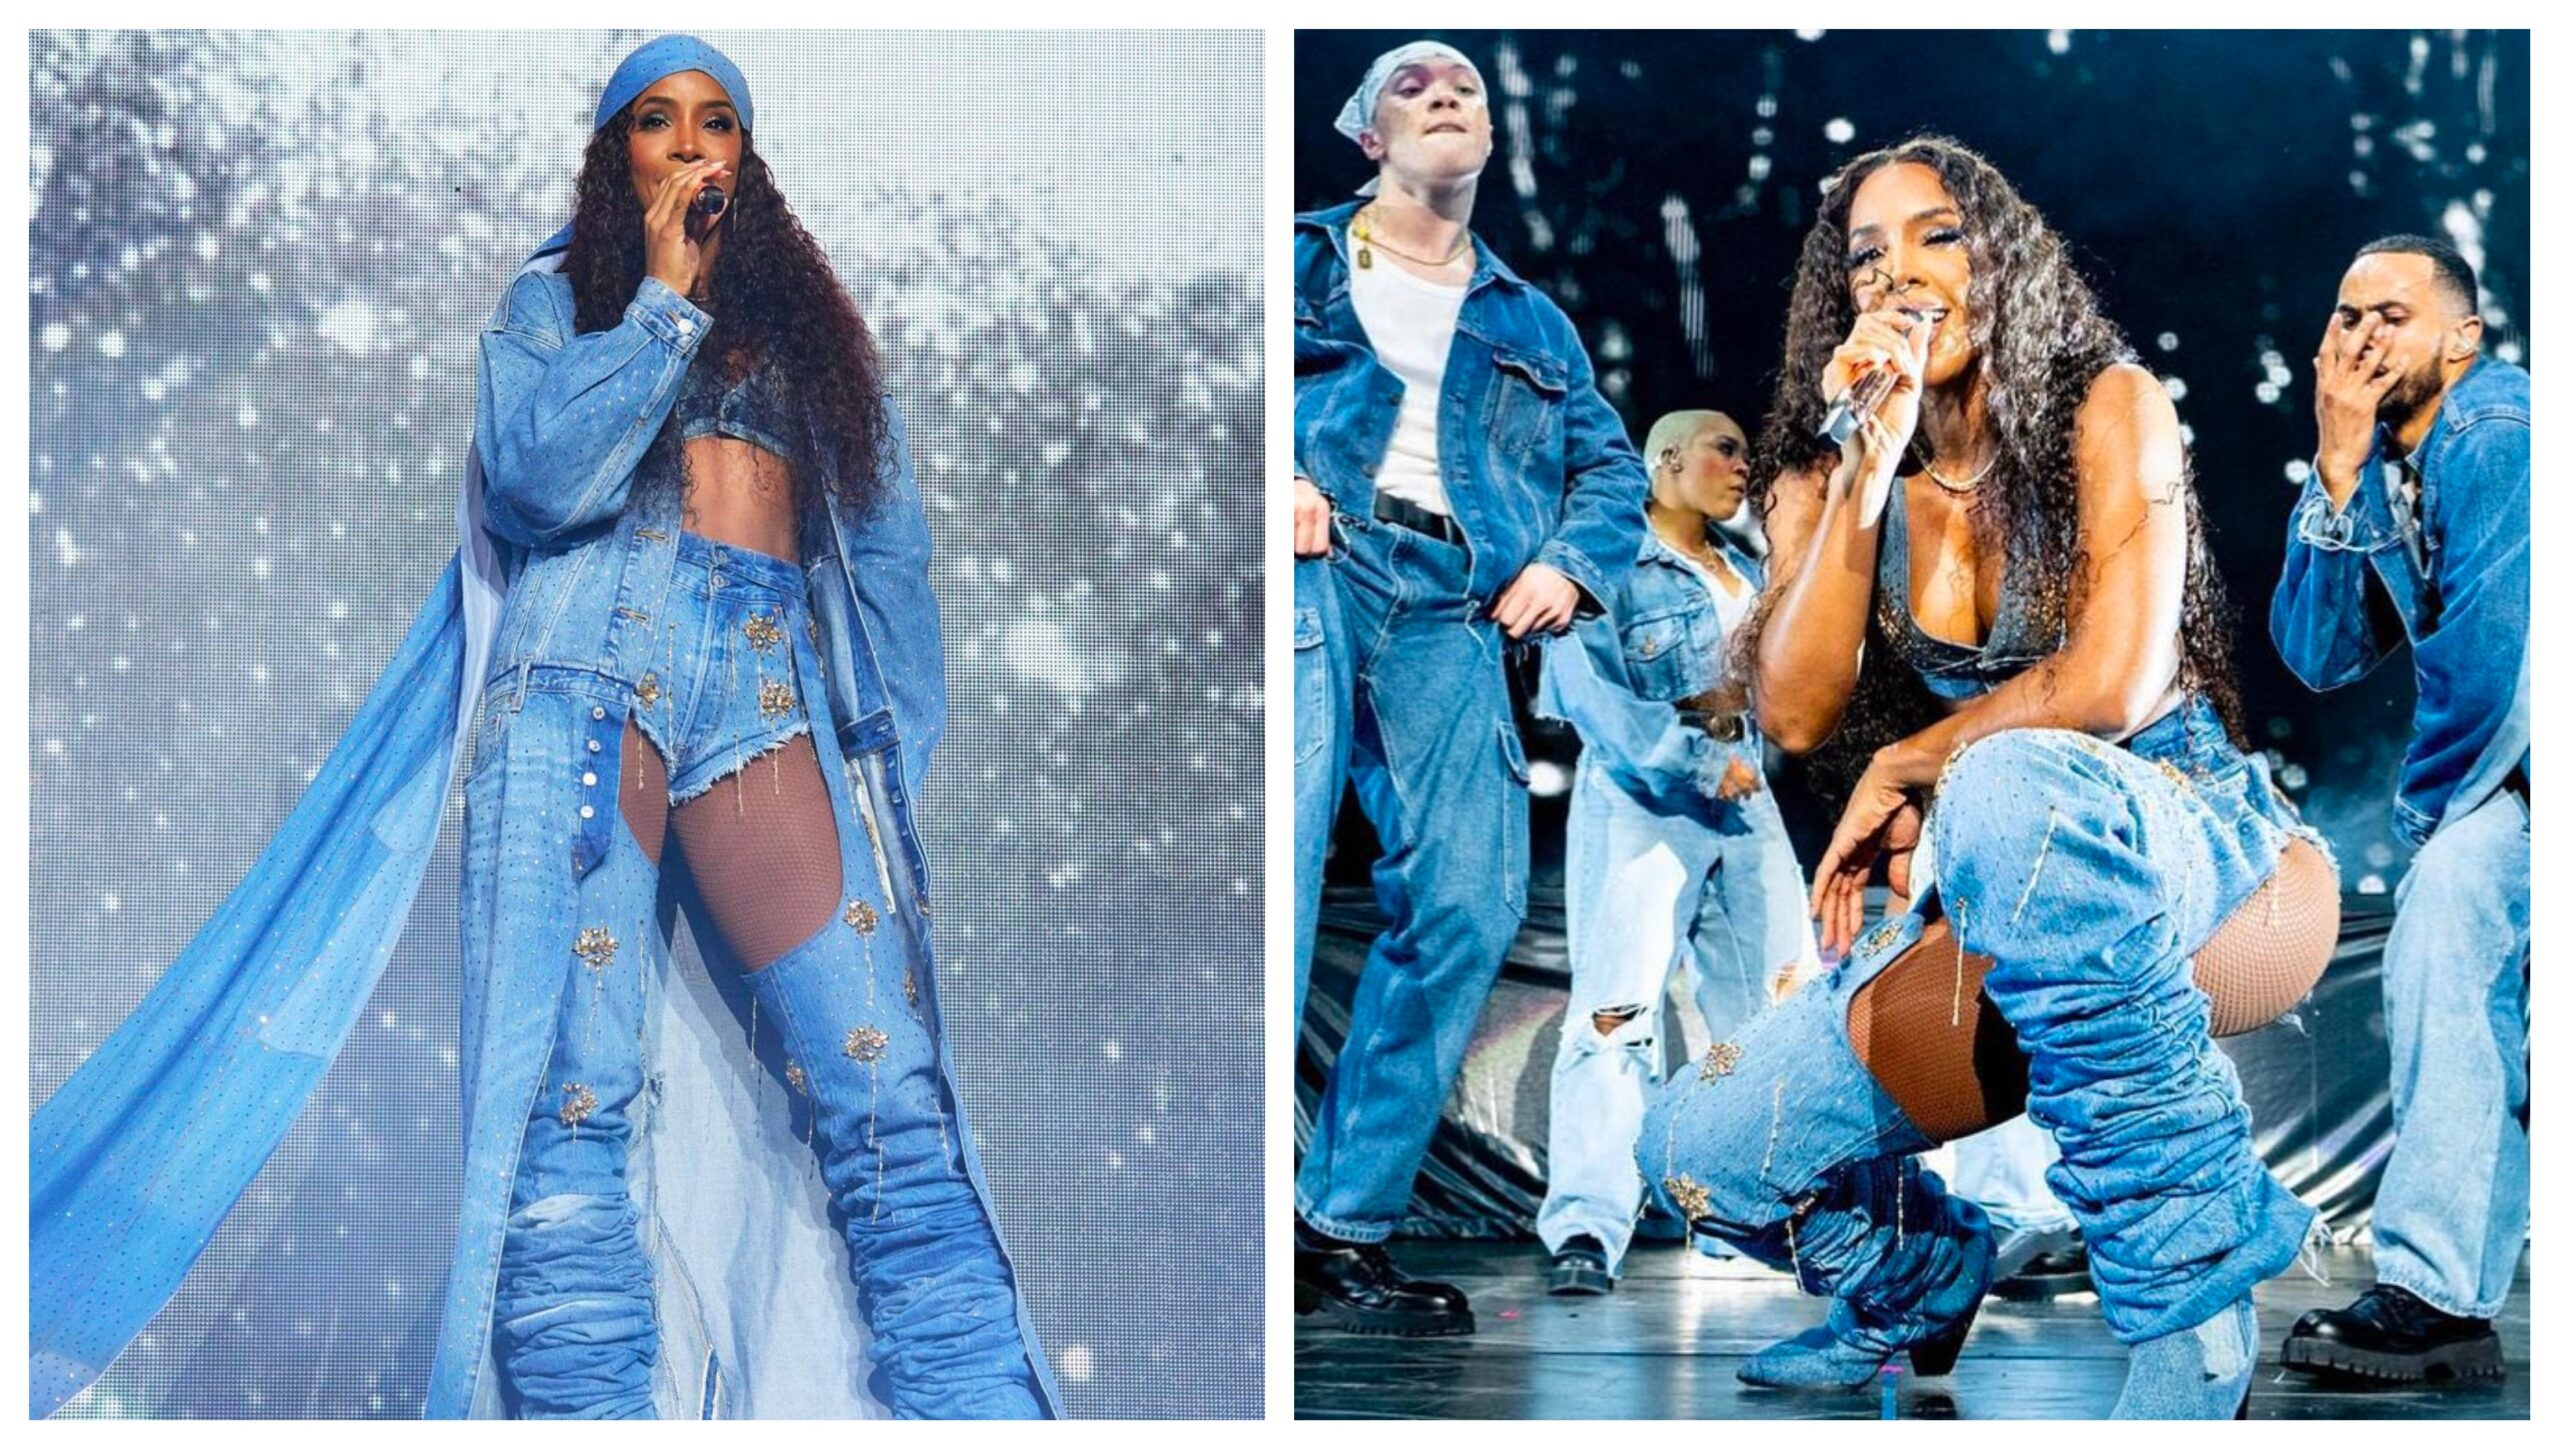 Watch: Kelly Rowland Marvels with ‘Motivation’ & More at RNB Fridayz in Australia